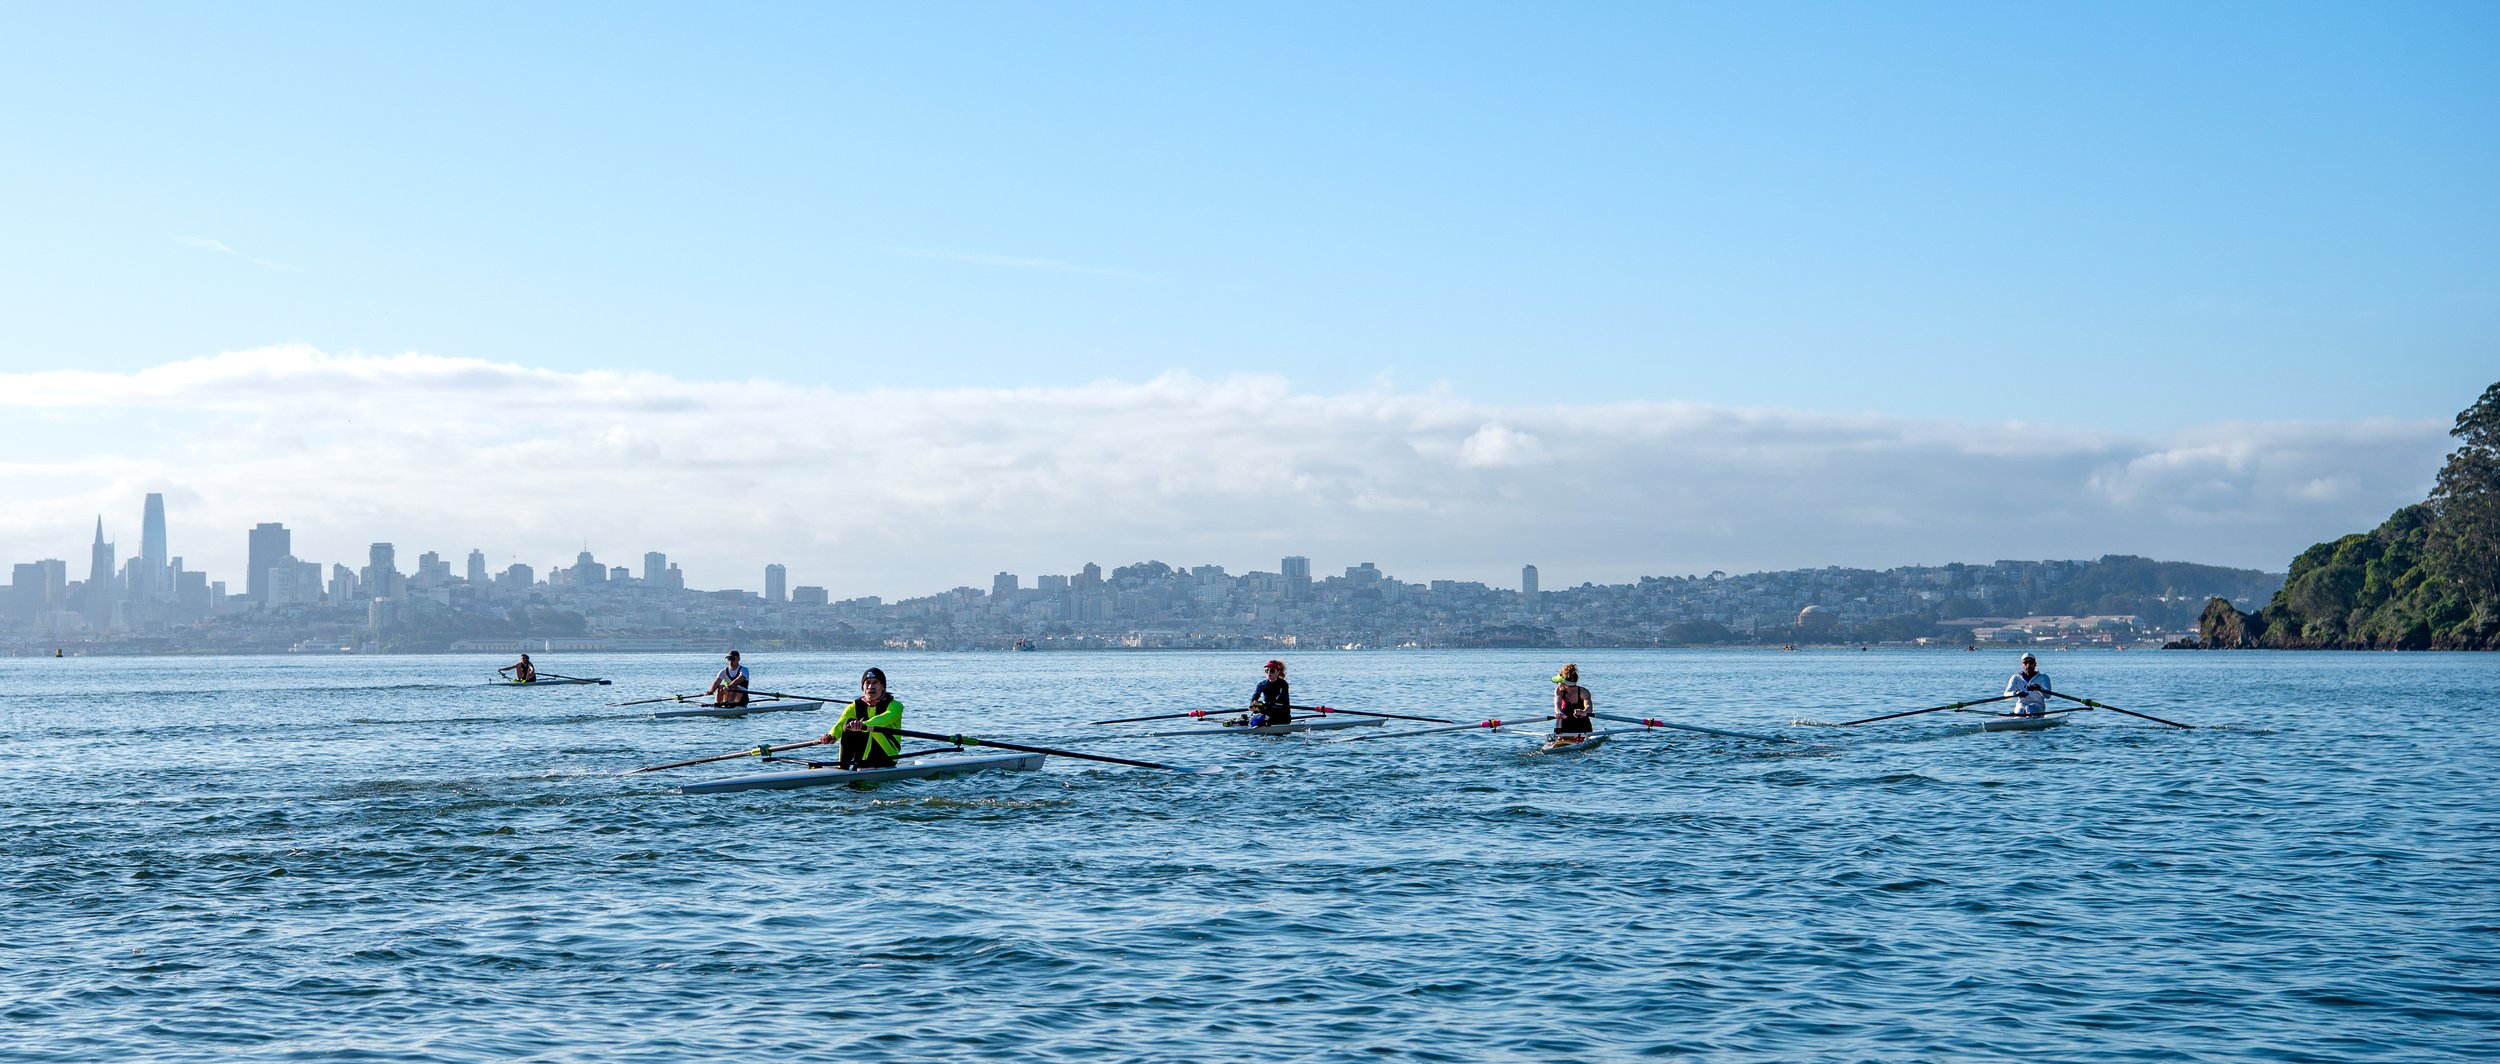   OPEN WATER ROWING CENTER   Sausalito, CA 